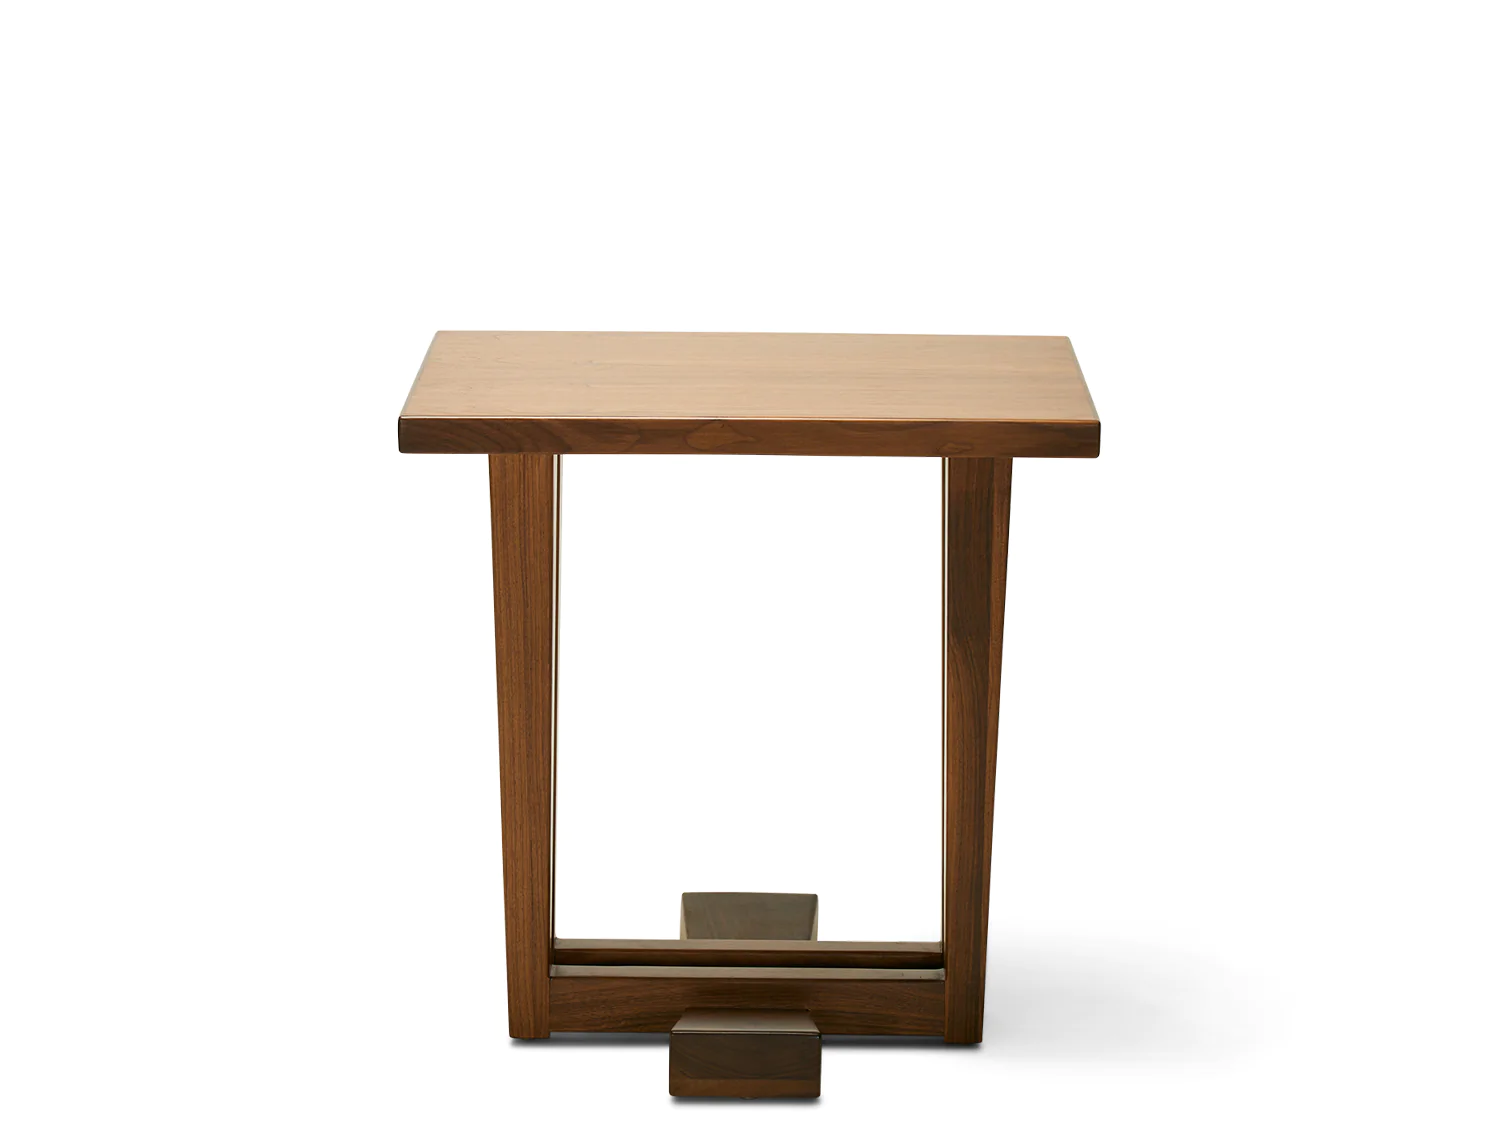 a small wooden table with a square base